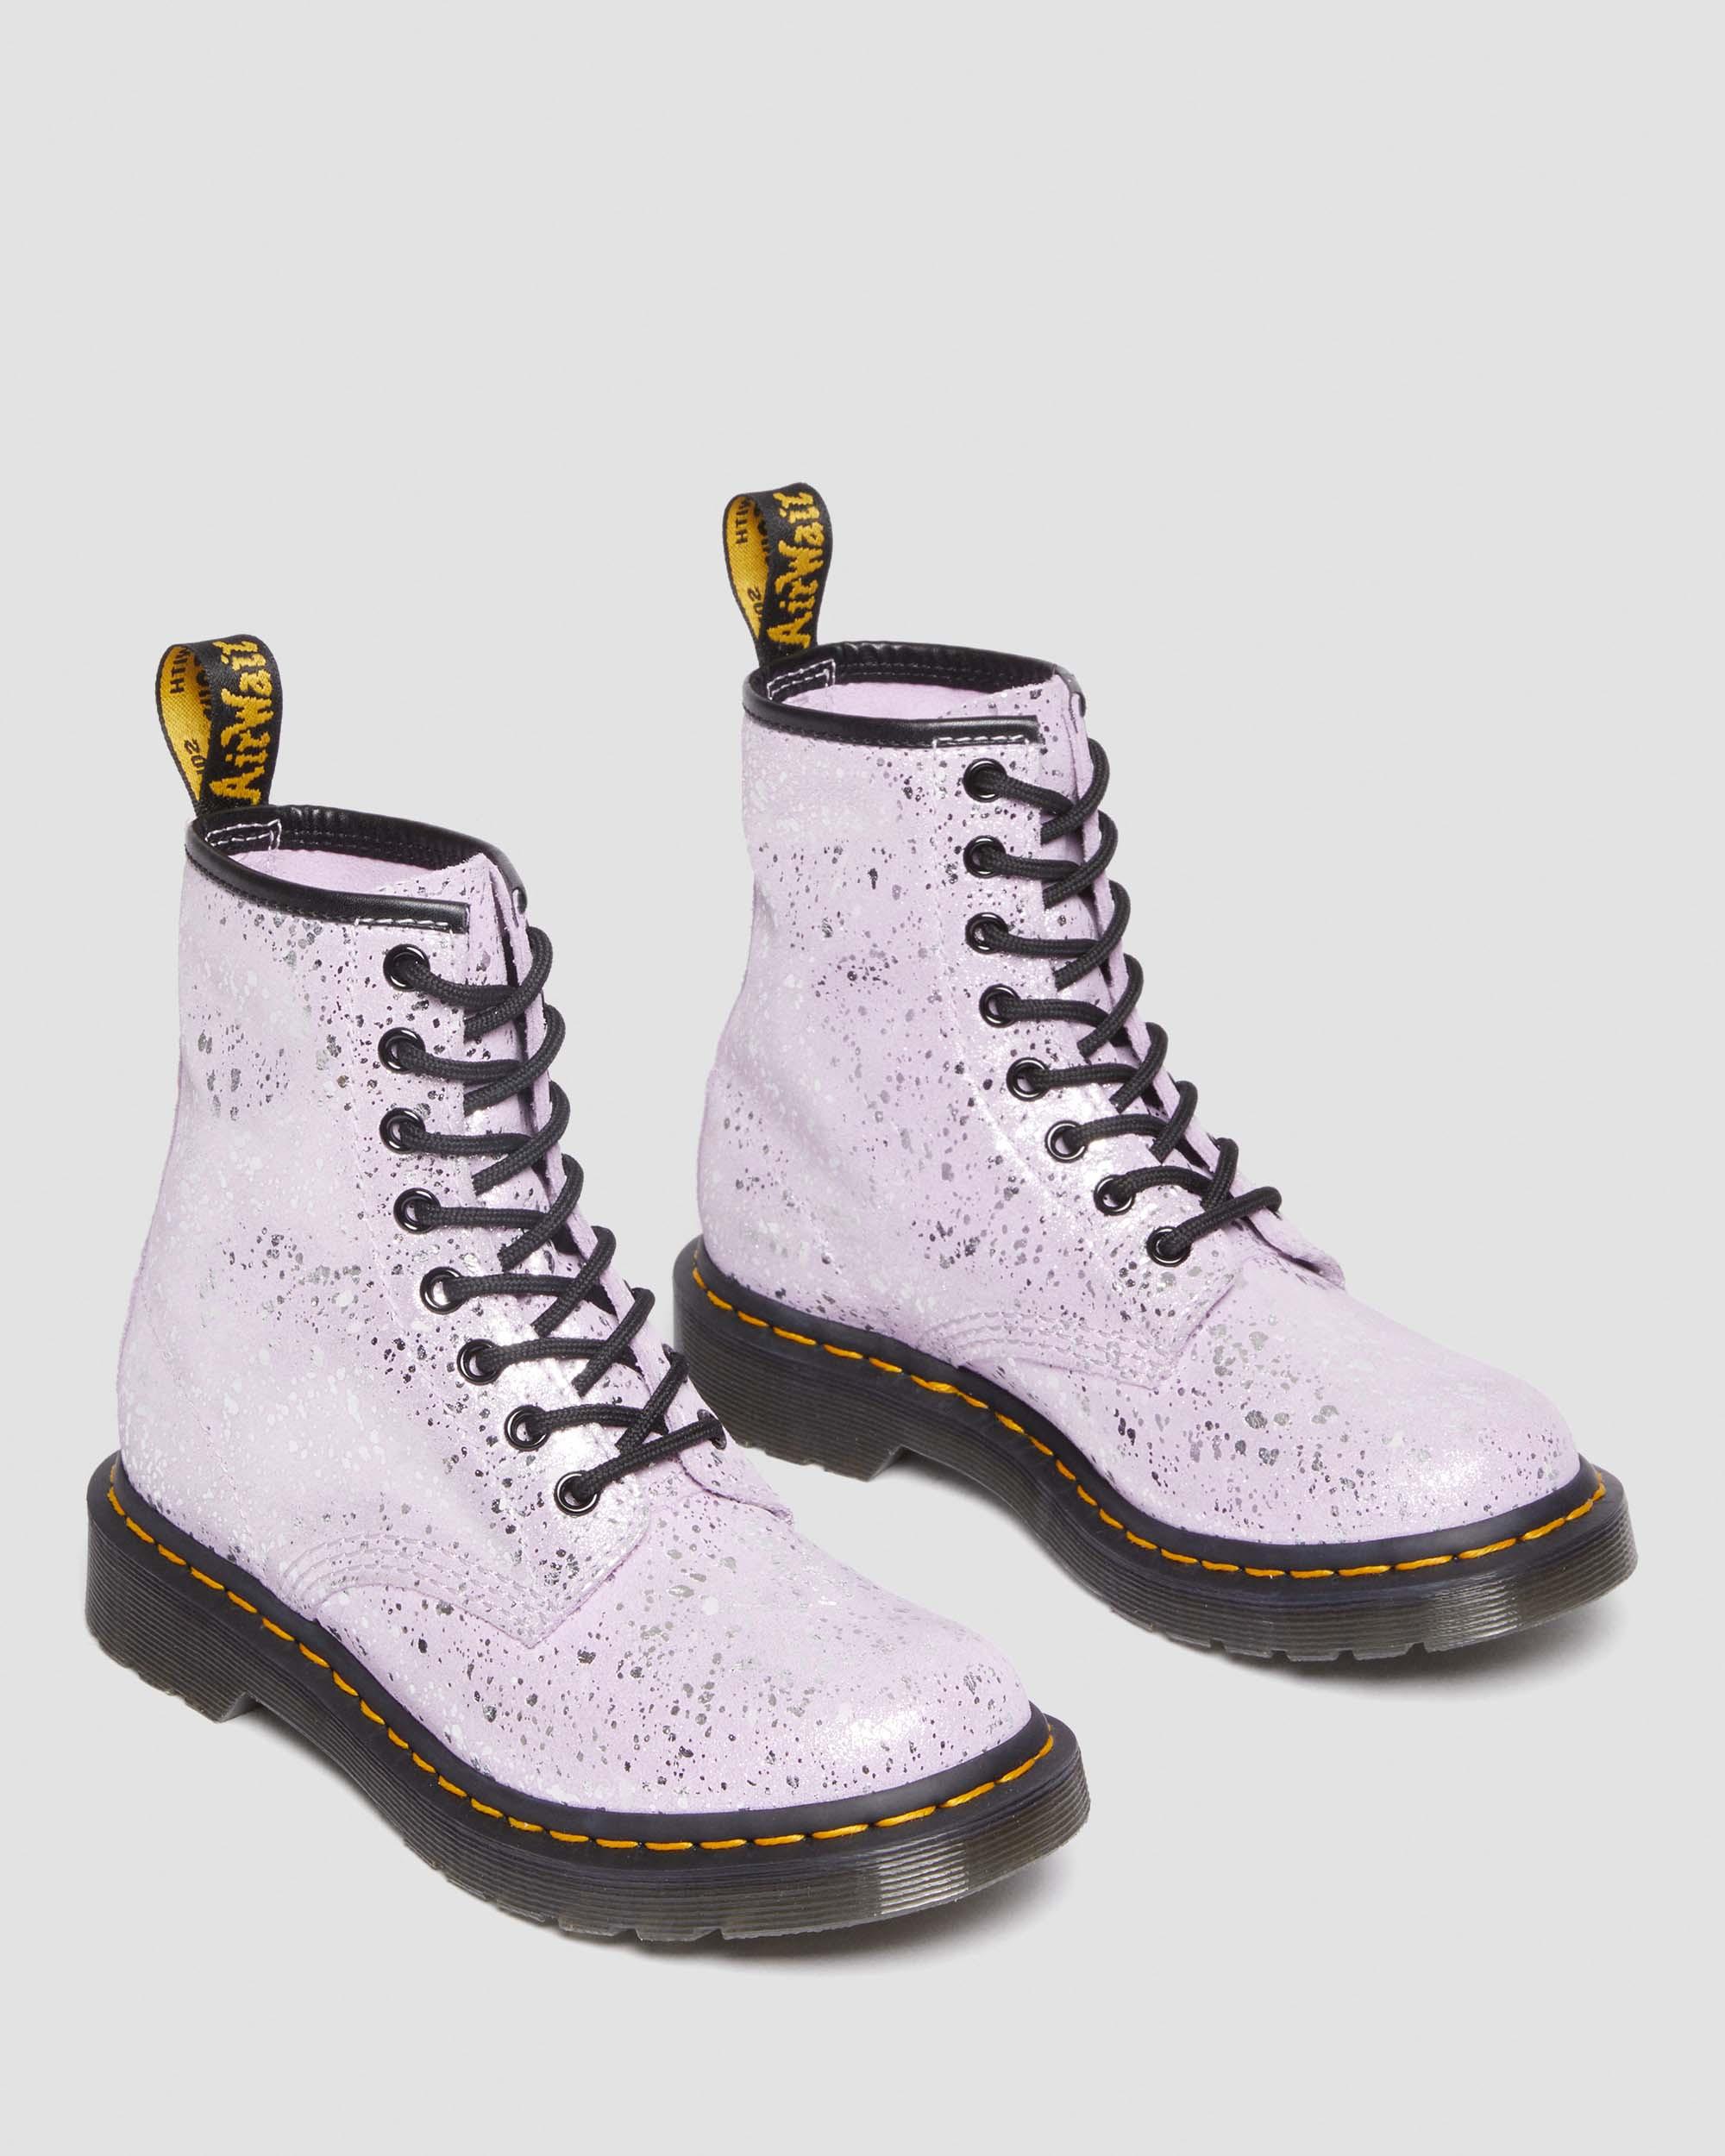 Up Metallic | Dr. 1460 Boots Martens Lilac in Splatter Suede Lace